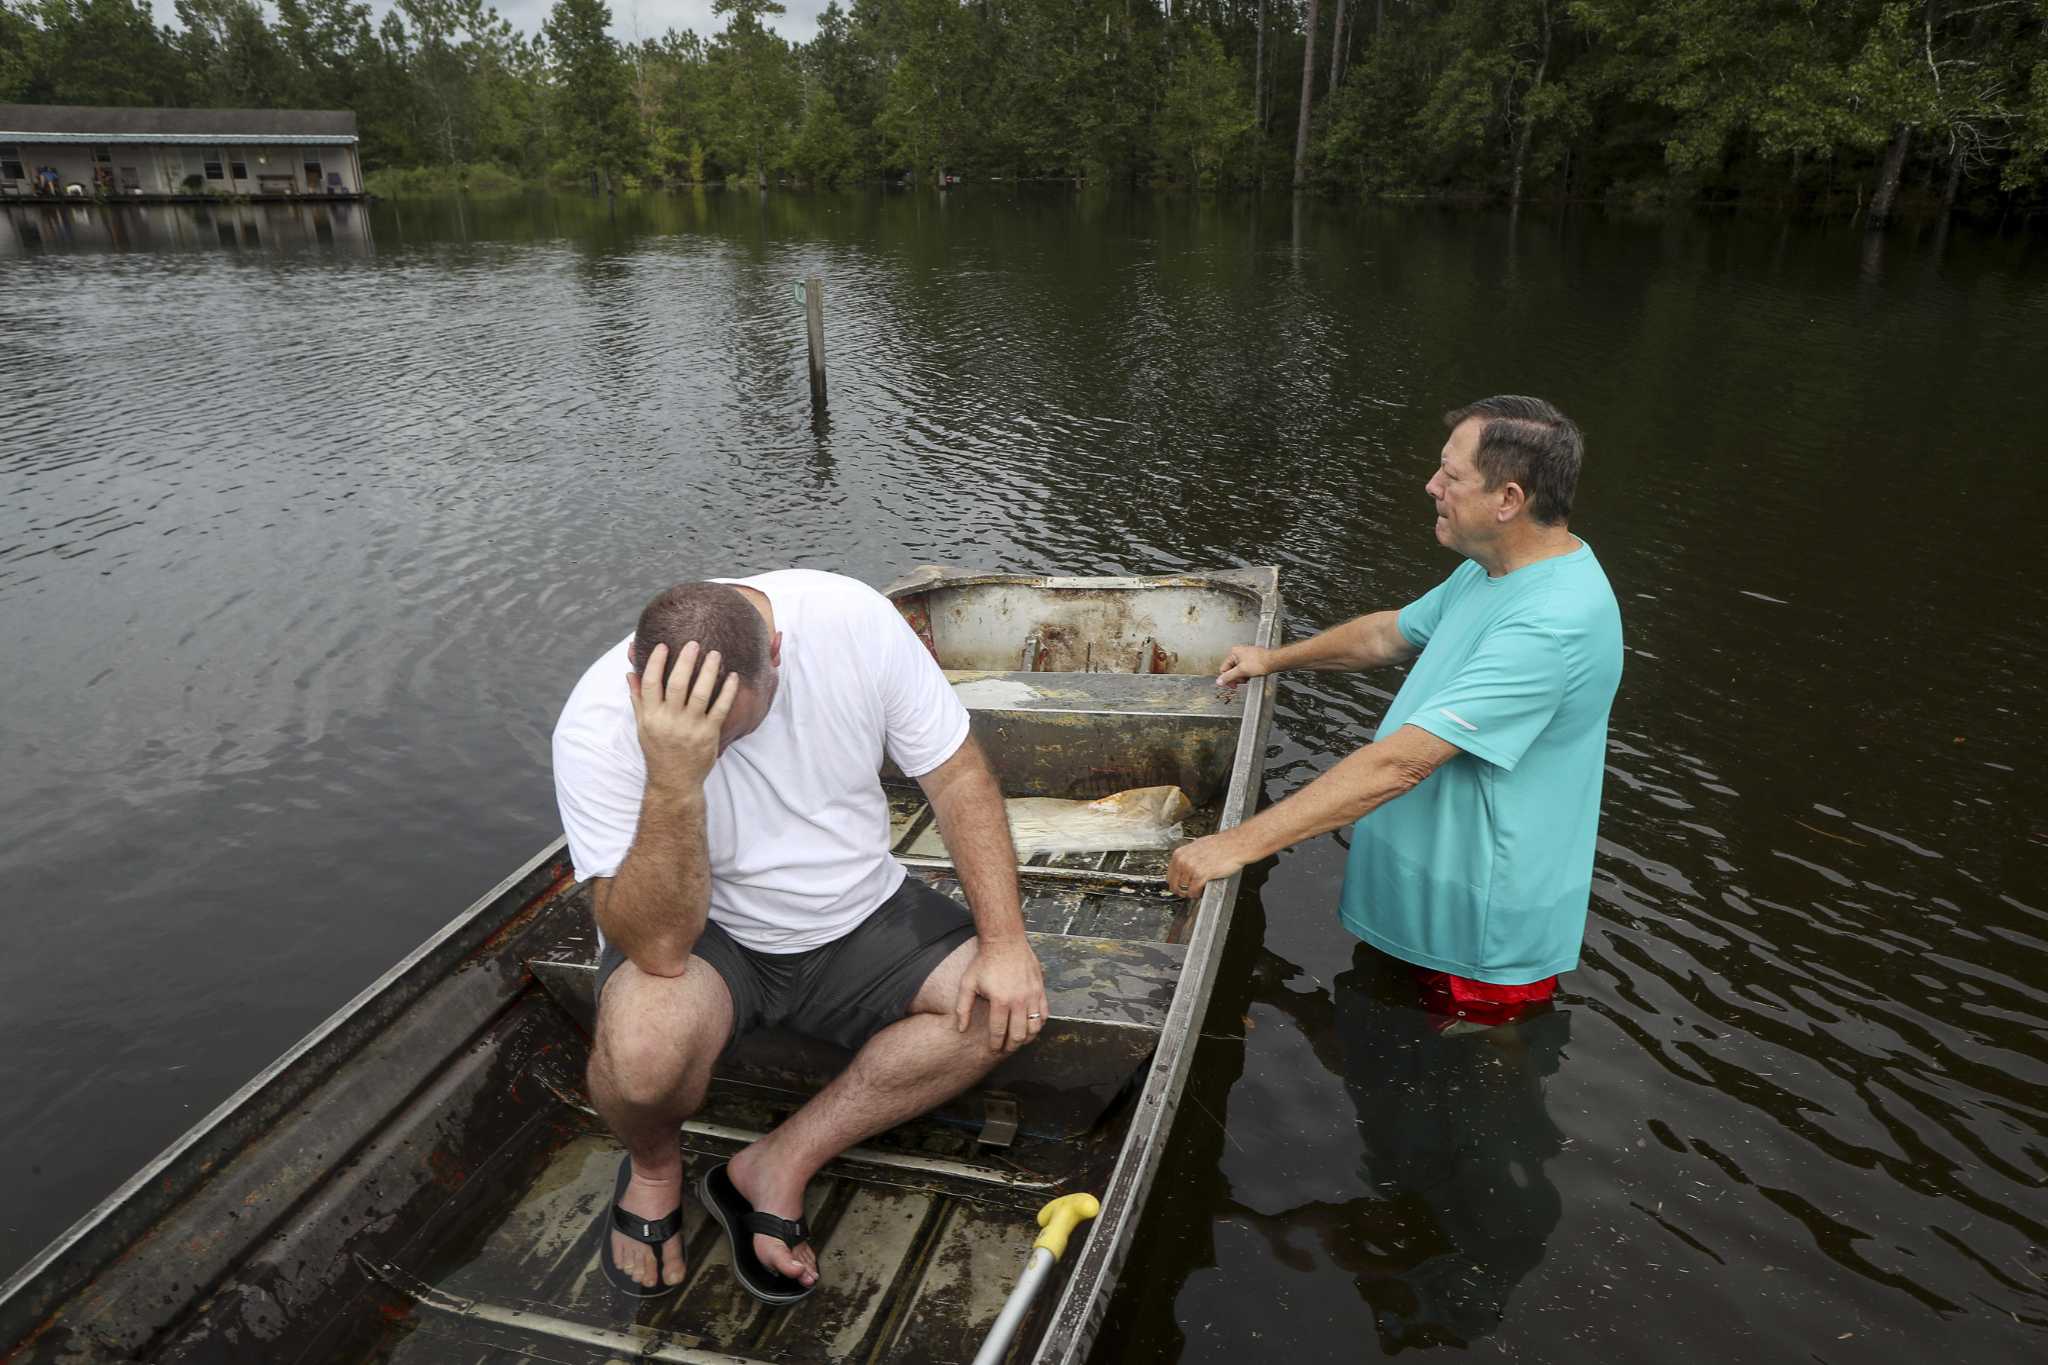 I’m a physician. We must act on climate change in Houston for our health. [Opinion] - Houston Chronicle